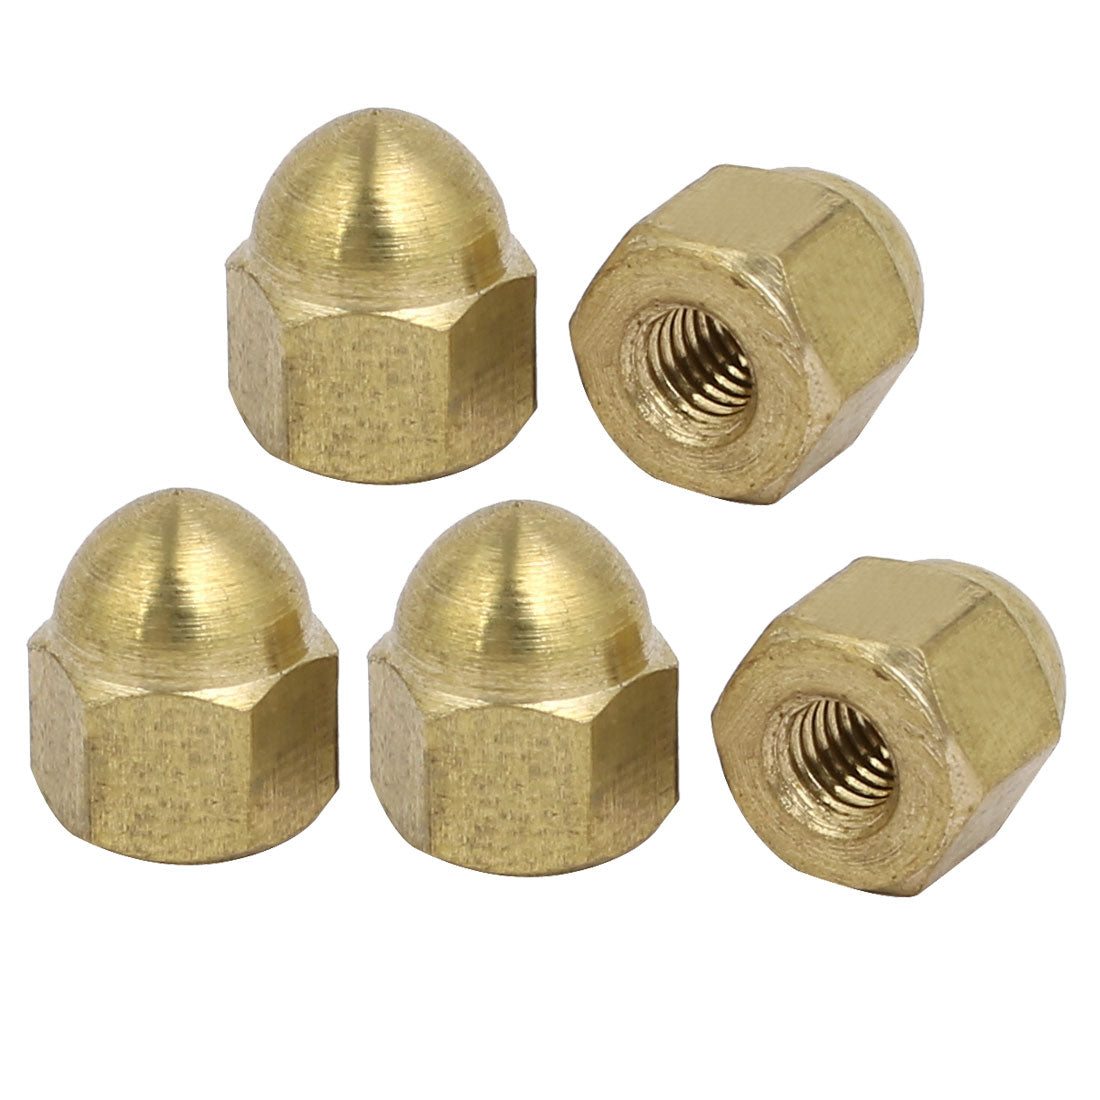 uxcell Uxcell 5pcs M3 Female Thread Nut DIN1587 Dome Cap Head Hex Brass Tone